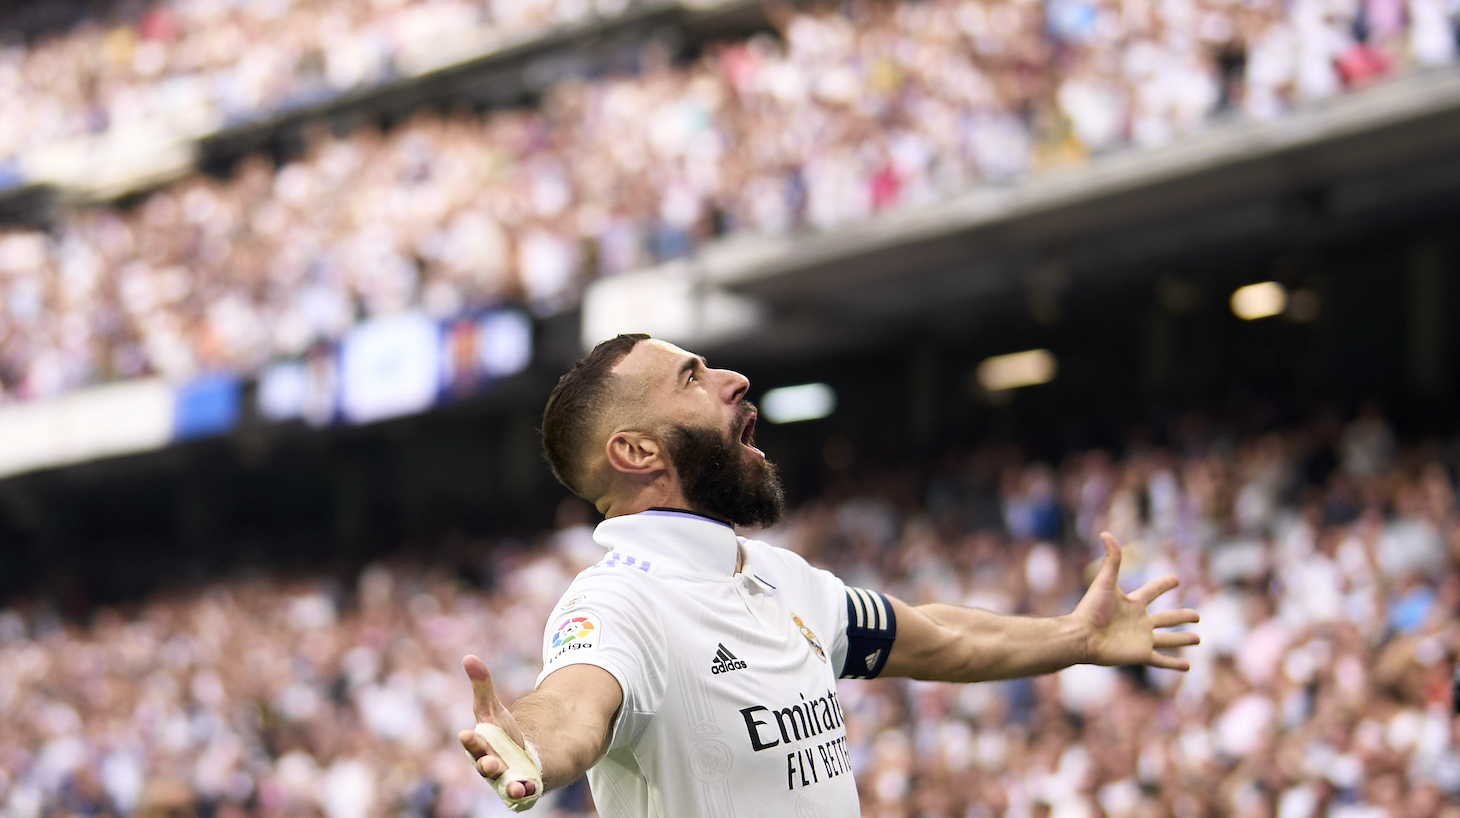 Karim Benzema of Real Madrid CF celebrates a goal prior to the referee cancelling the goal during the LaLiga Santander match between Real Madrid CF and FC Barcelona at Estadio Santiago Bernabeu on October 16, 2022 in Madrid, Spain.